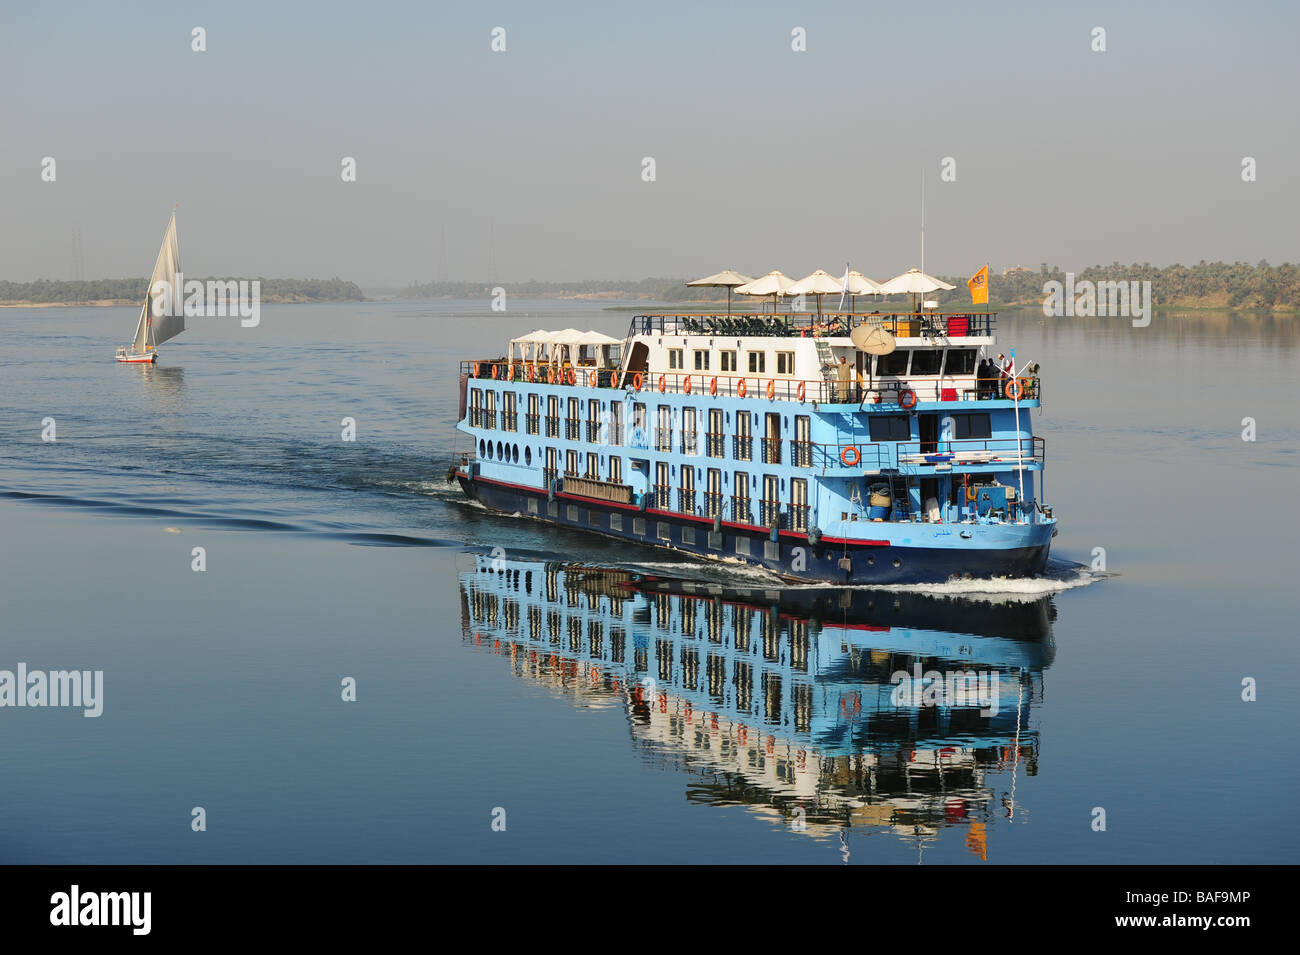 Africa Egypt A Nile River cruise boat heads North in the calm waters with a felucca sailboat behind it Stock Photo